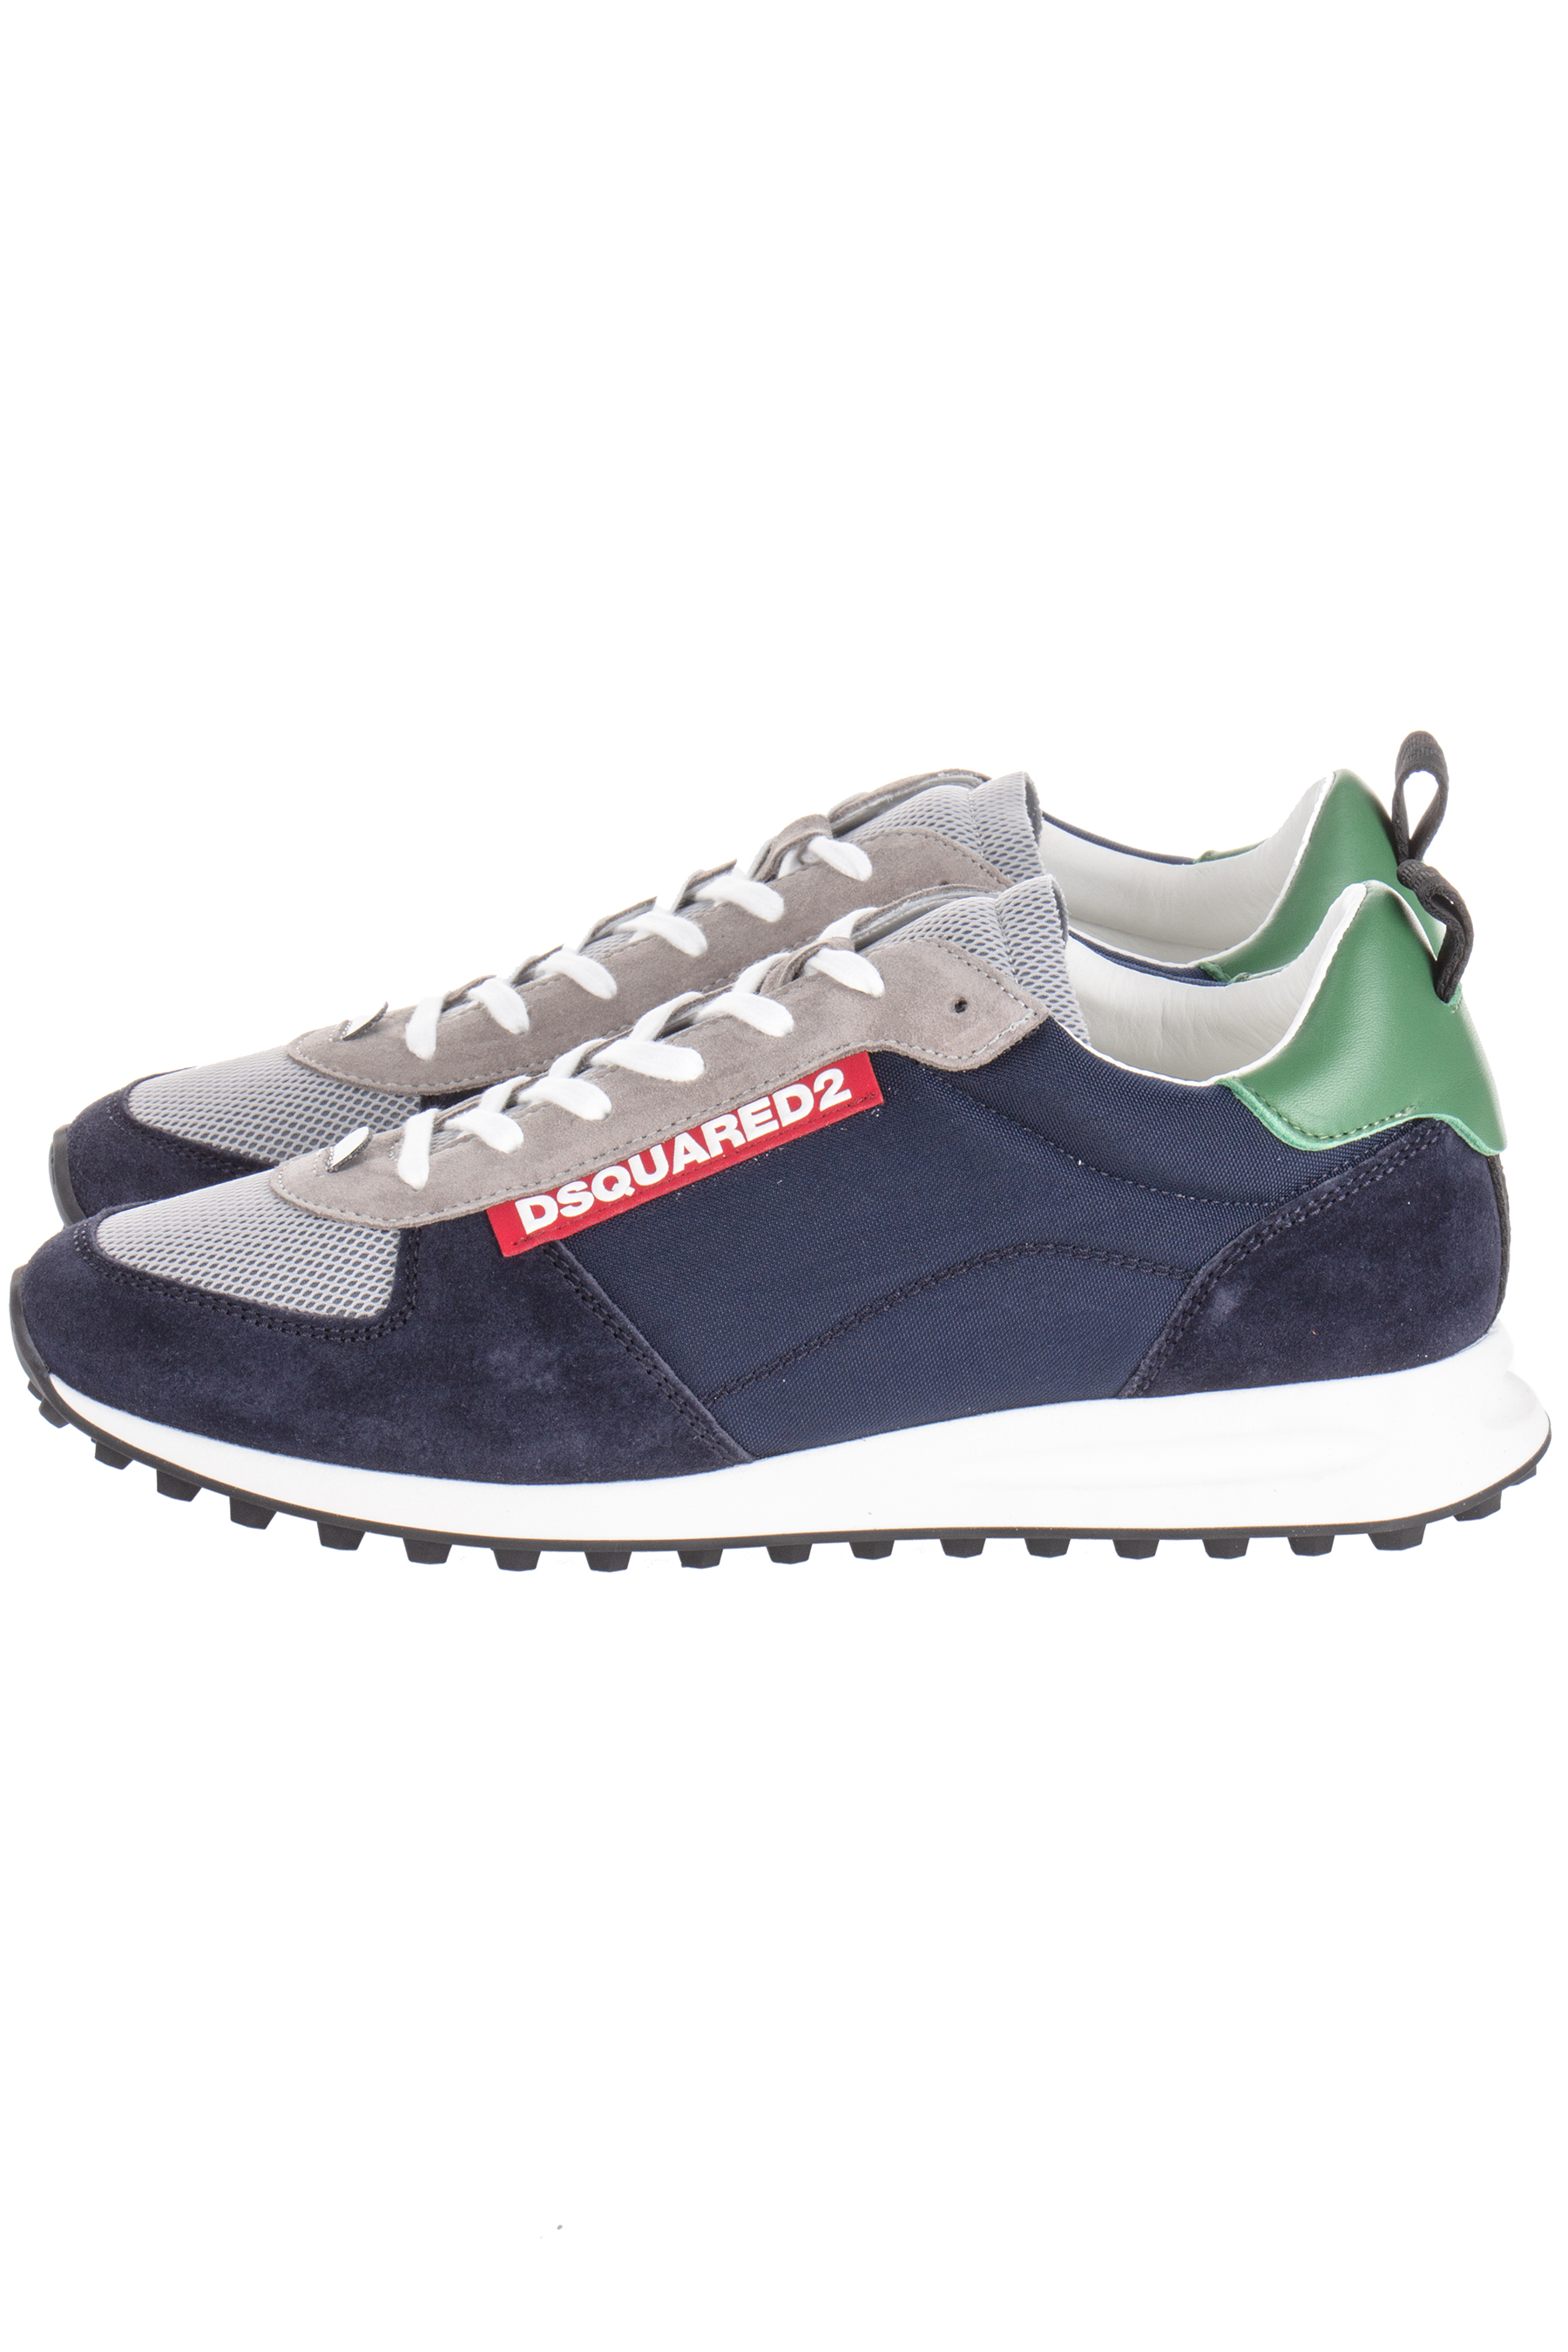 dsquared2 new runner sneakers